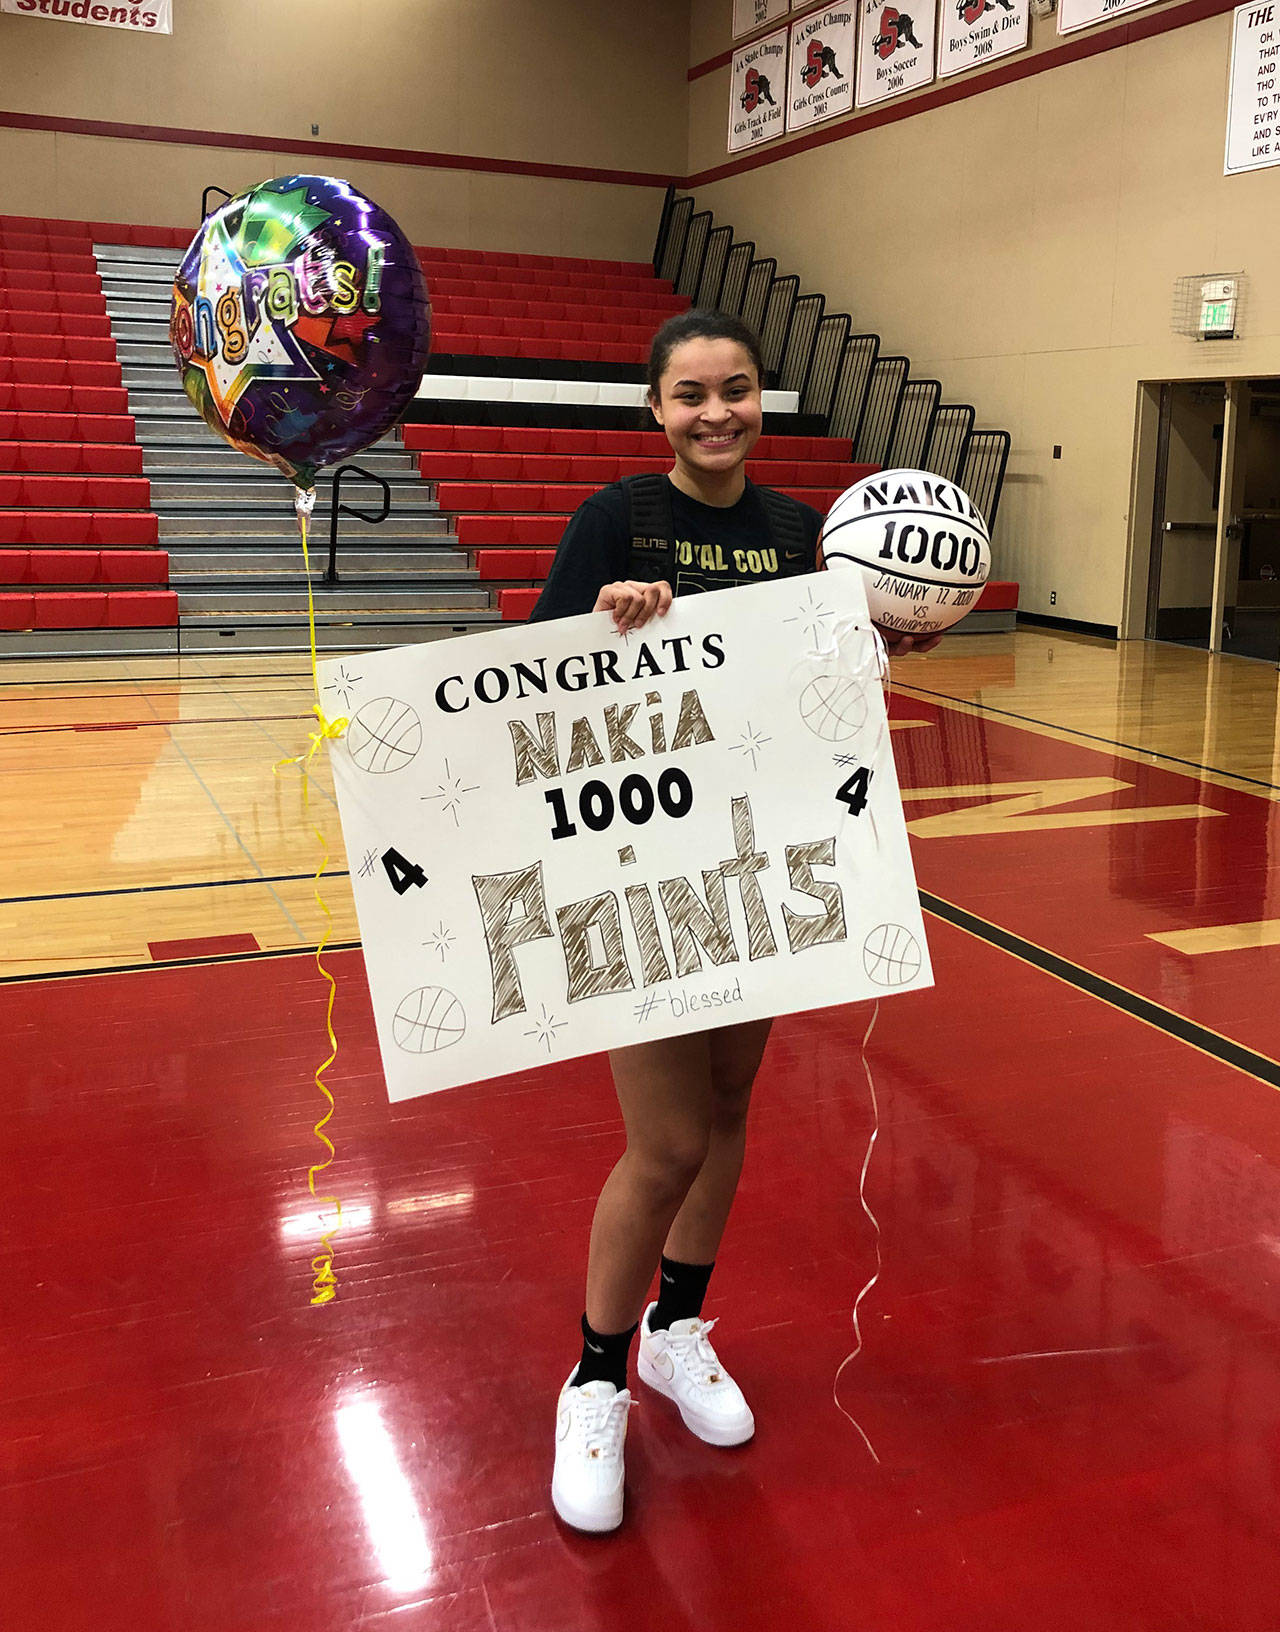 Lynnwood’s Nakia Boston poses after surpassing 1,000 career points in a game against Snohomish on Friday evening. (Photo provided by Brandon Newby)